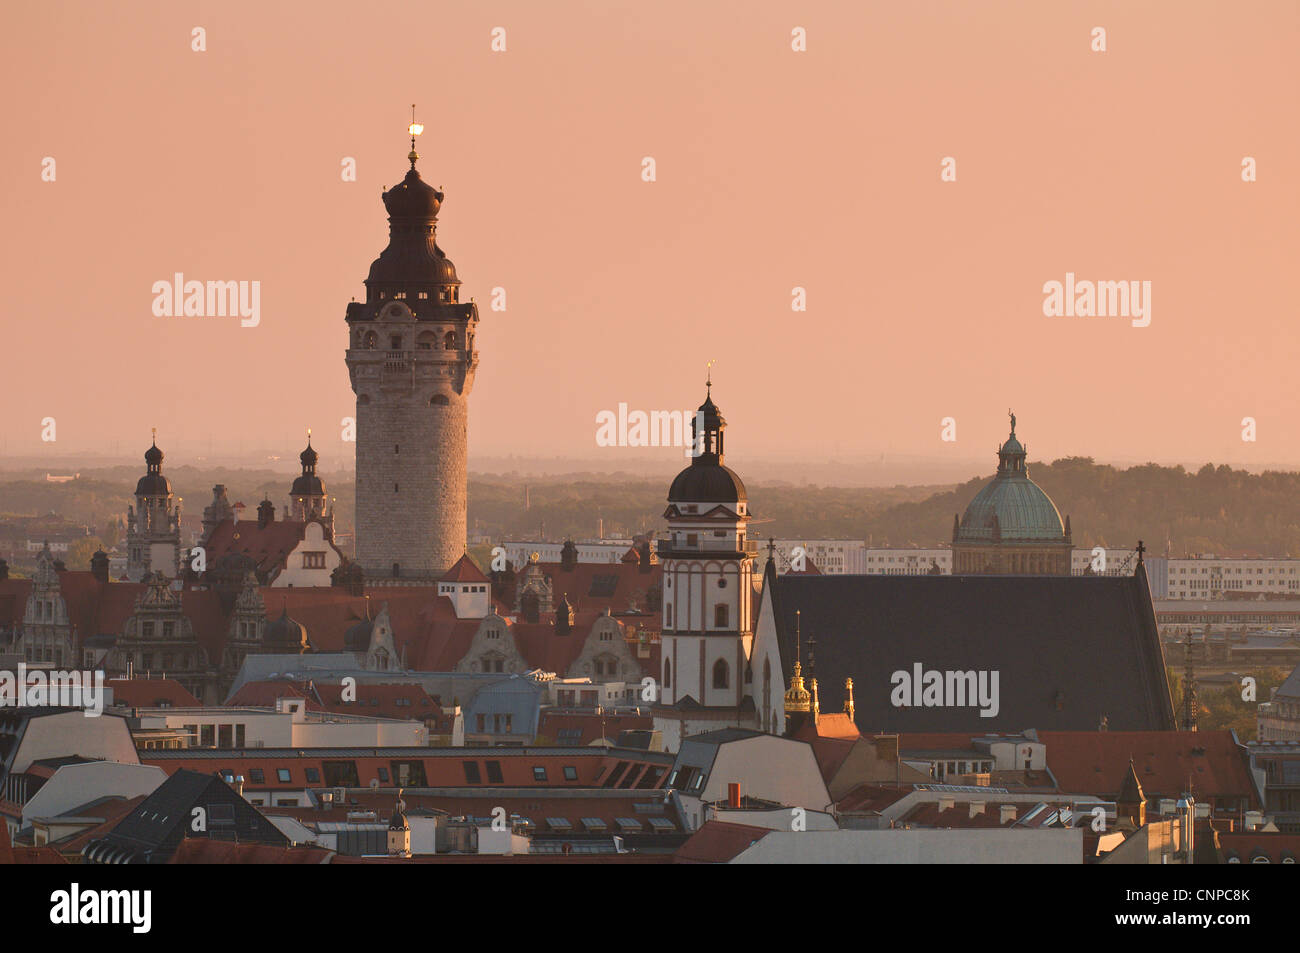 Skyline of Leipzig with the New Town Hall tower (left) and St. Thomas Church steeple (white) , Germany. Stock Photo